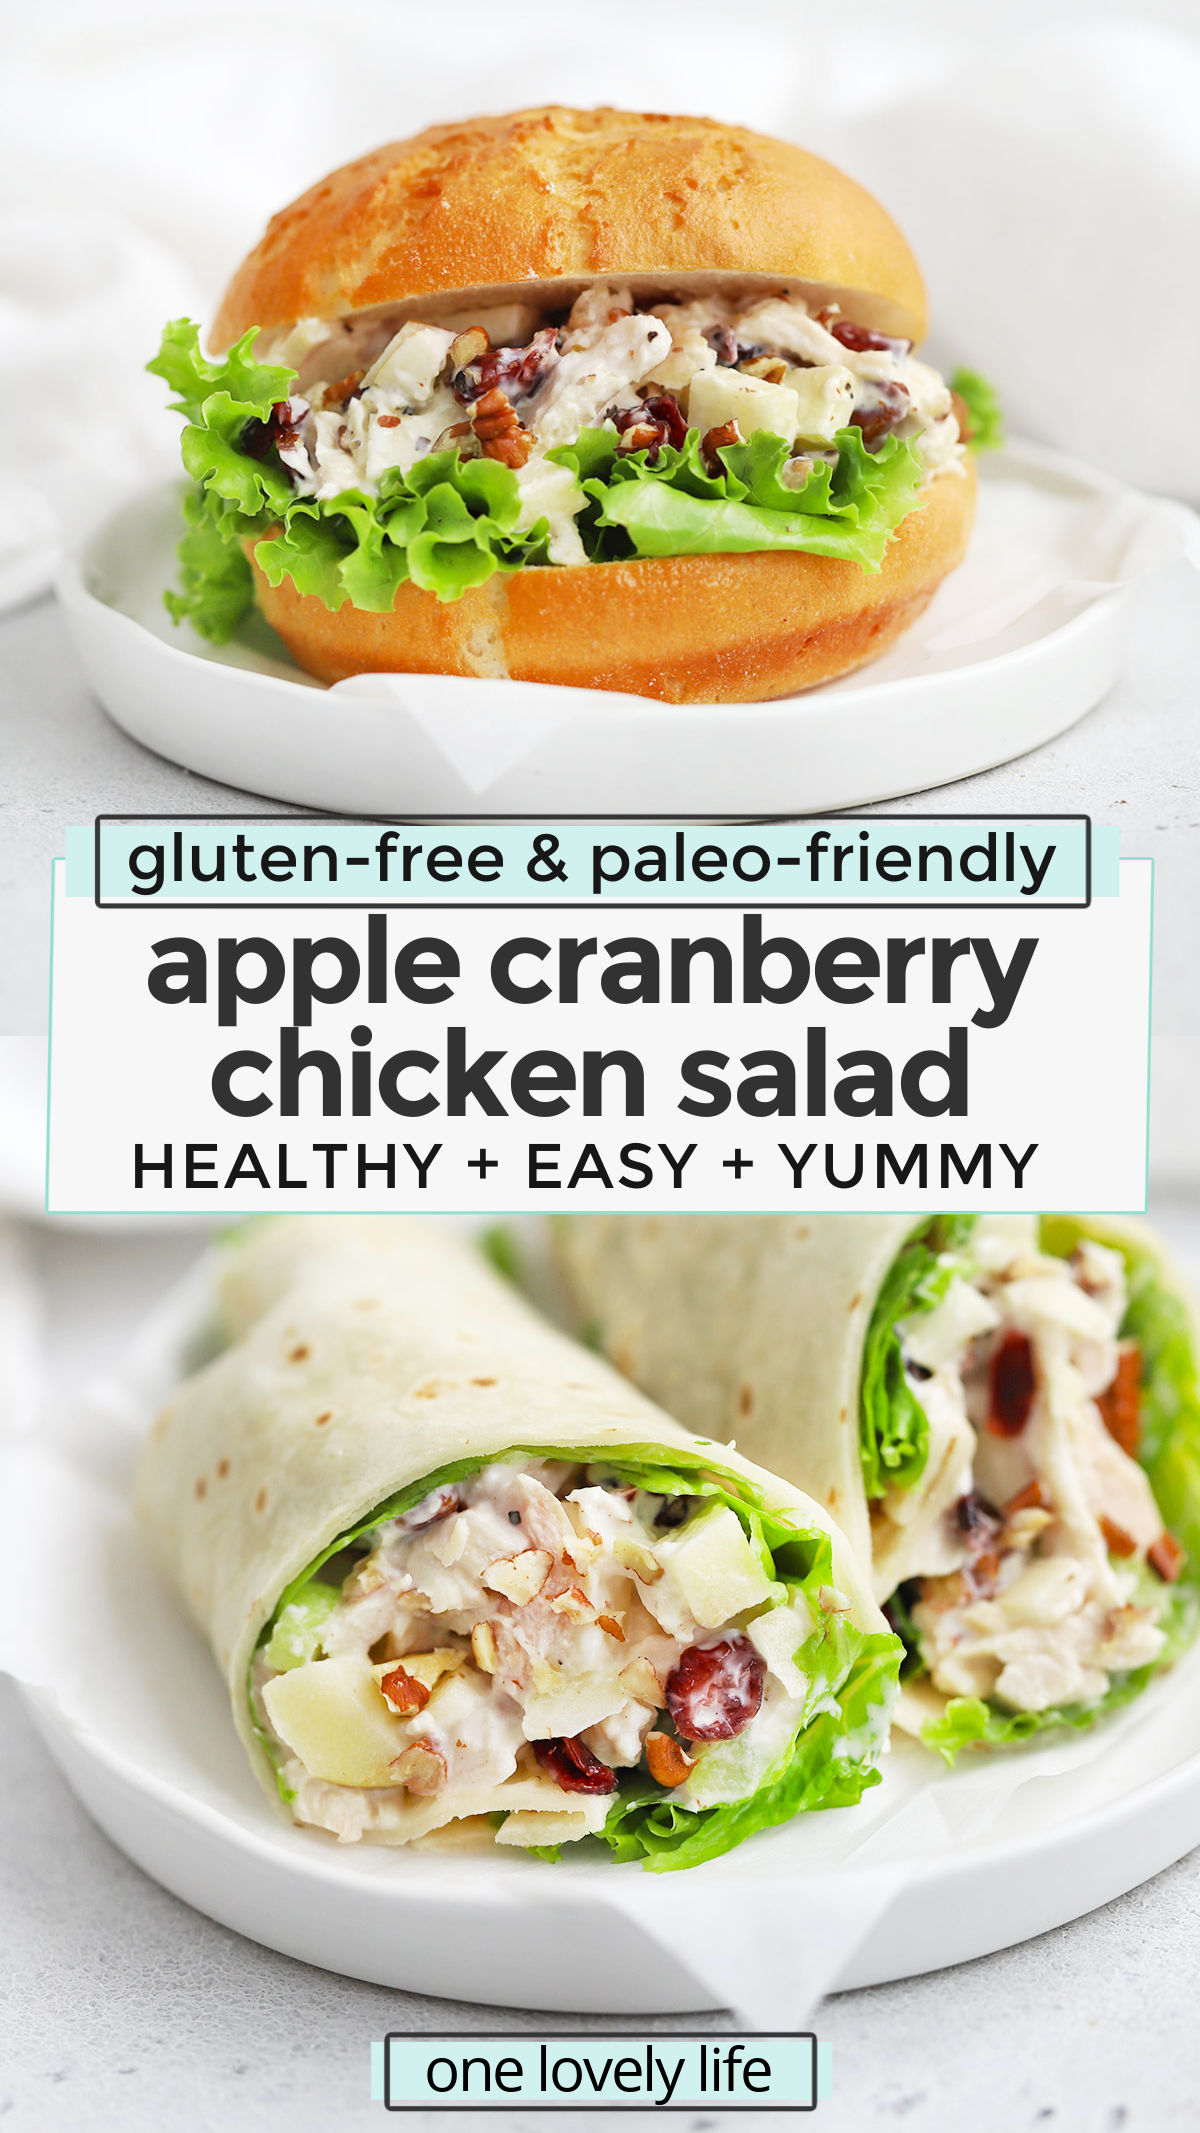 Apple Chicken Salad - This chicken salad with apples is perfect for the start of fall! It's the perfect combination of savory, sweet, creamy, and crunchy. Don't miss all our serving ideas below! (Gluten-Free, Paleo-Friendly) // Apple Chicken Salad // Pecan Chicken Salad // Cranberry Pecan Chicken Salad // Fall Chicken Salad #glutenfree #paleo #chickensalad #mealprep